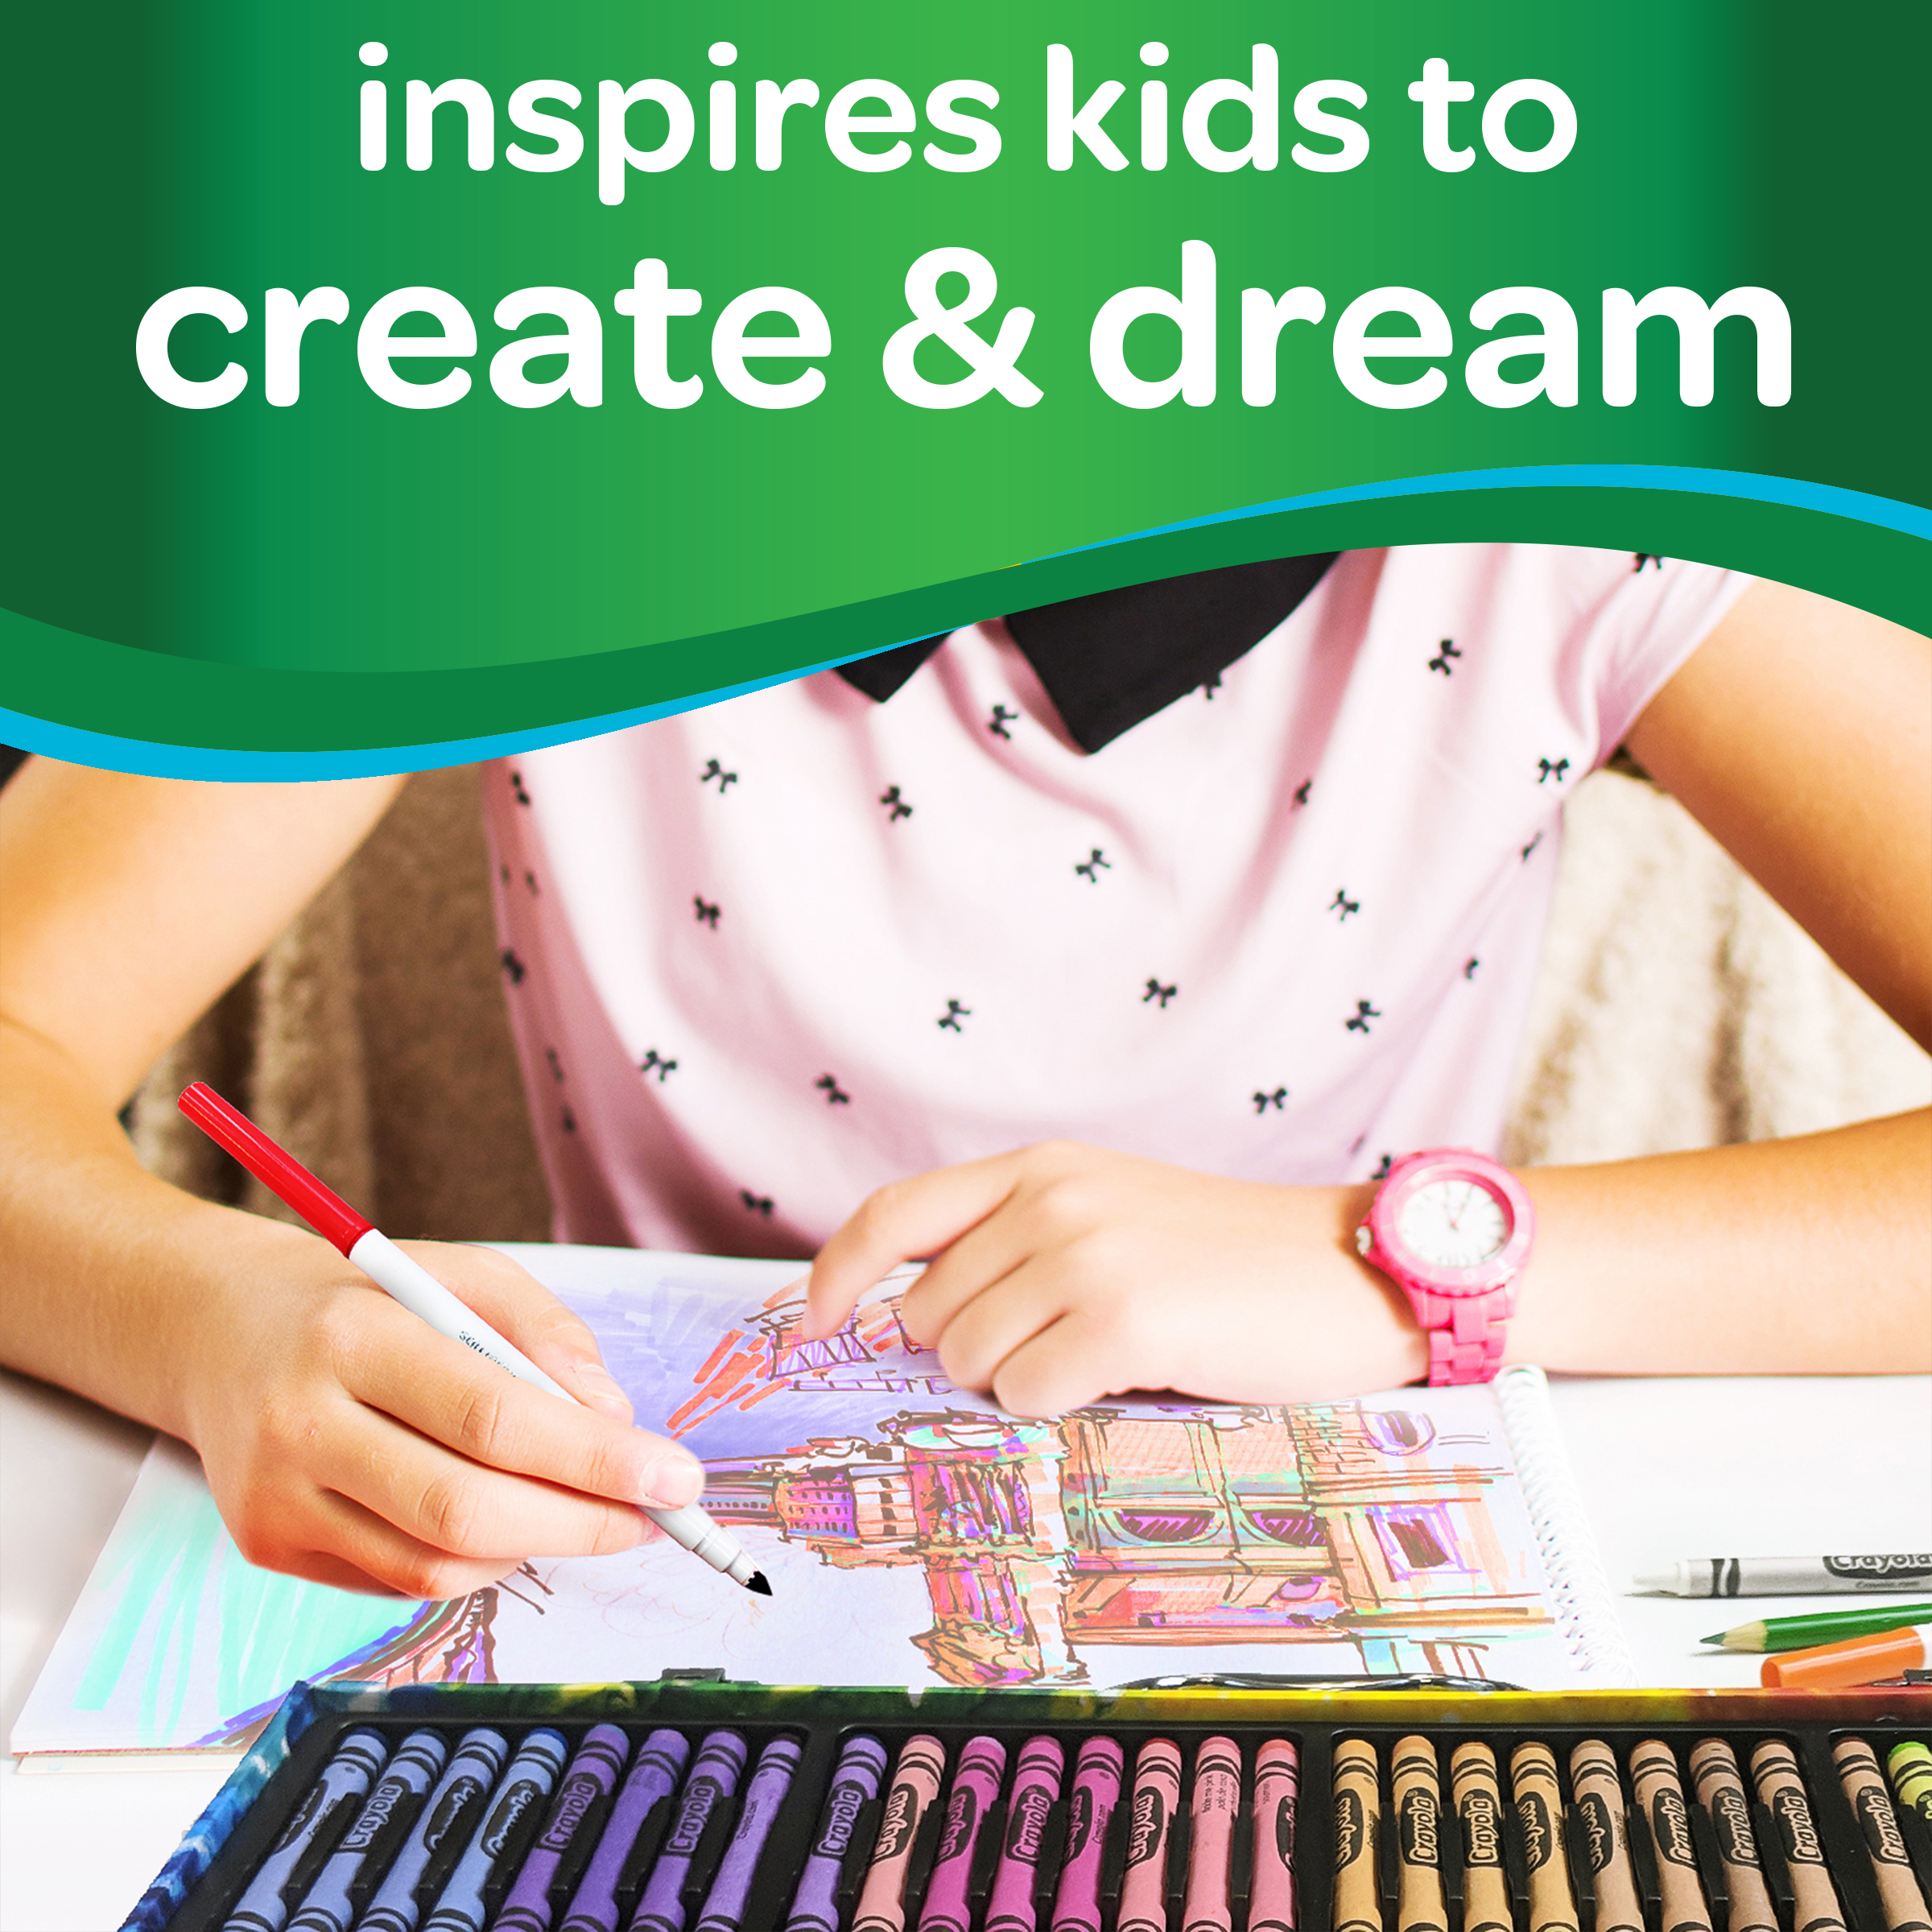 Crayola Inspiration Art Case, 140 Pieces, Assorted Colors, Gifts for Kids - image 3 of 8